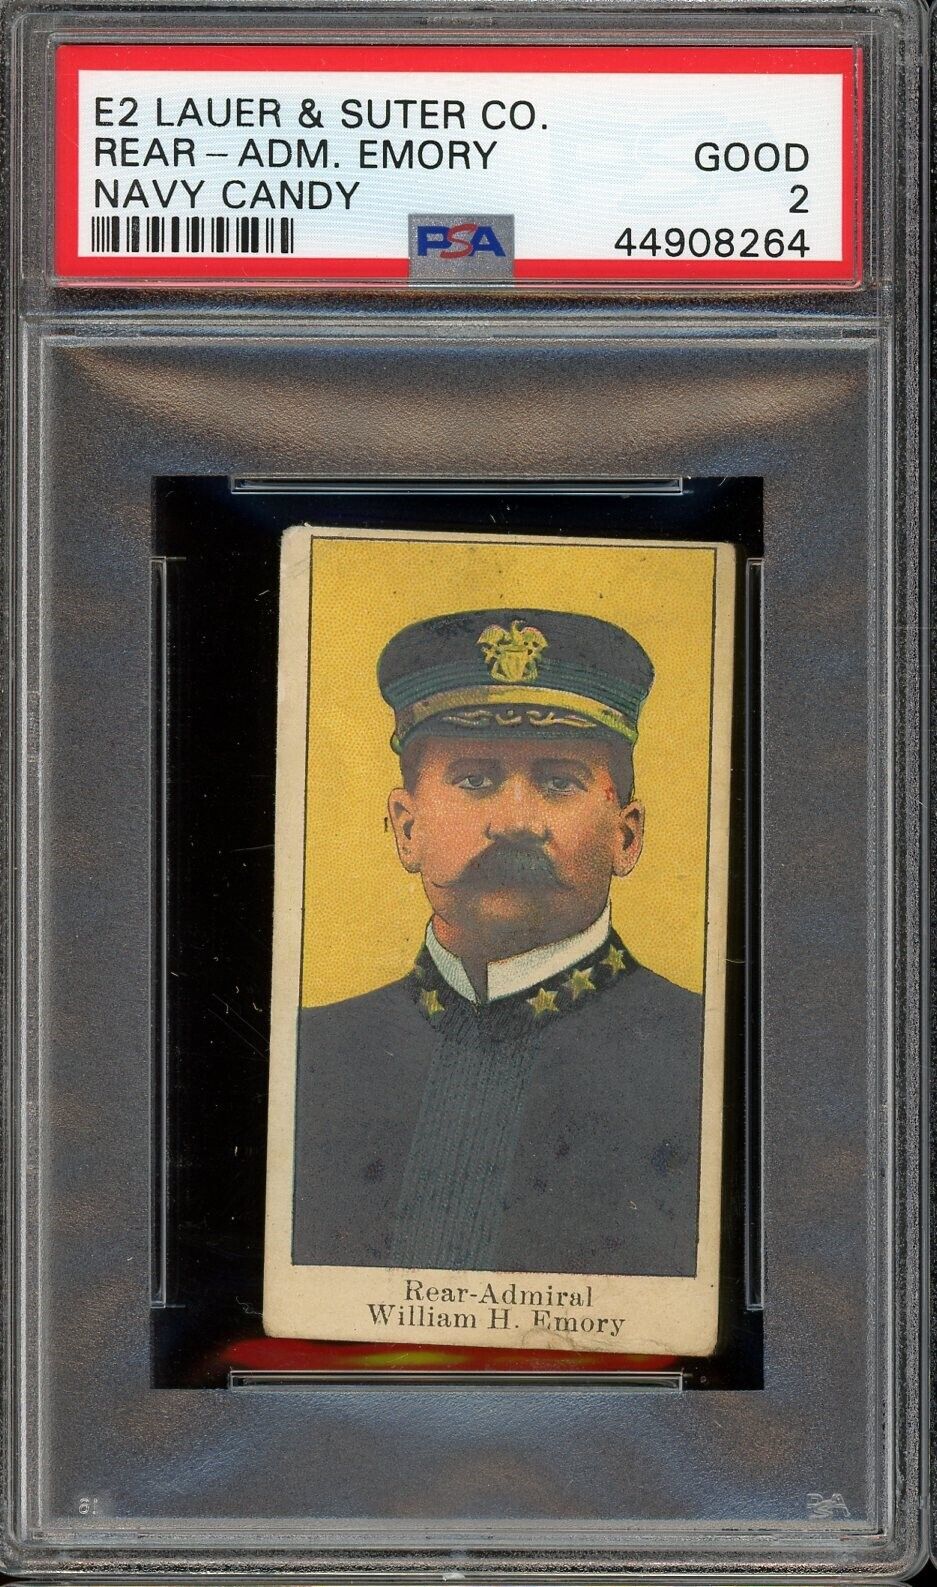 1910 E2 Lauer & Suter Co. Navy Candy Rear Admiral Emory PSA 2